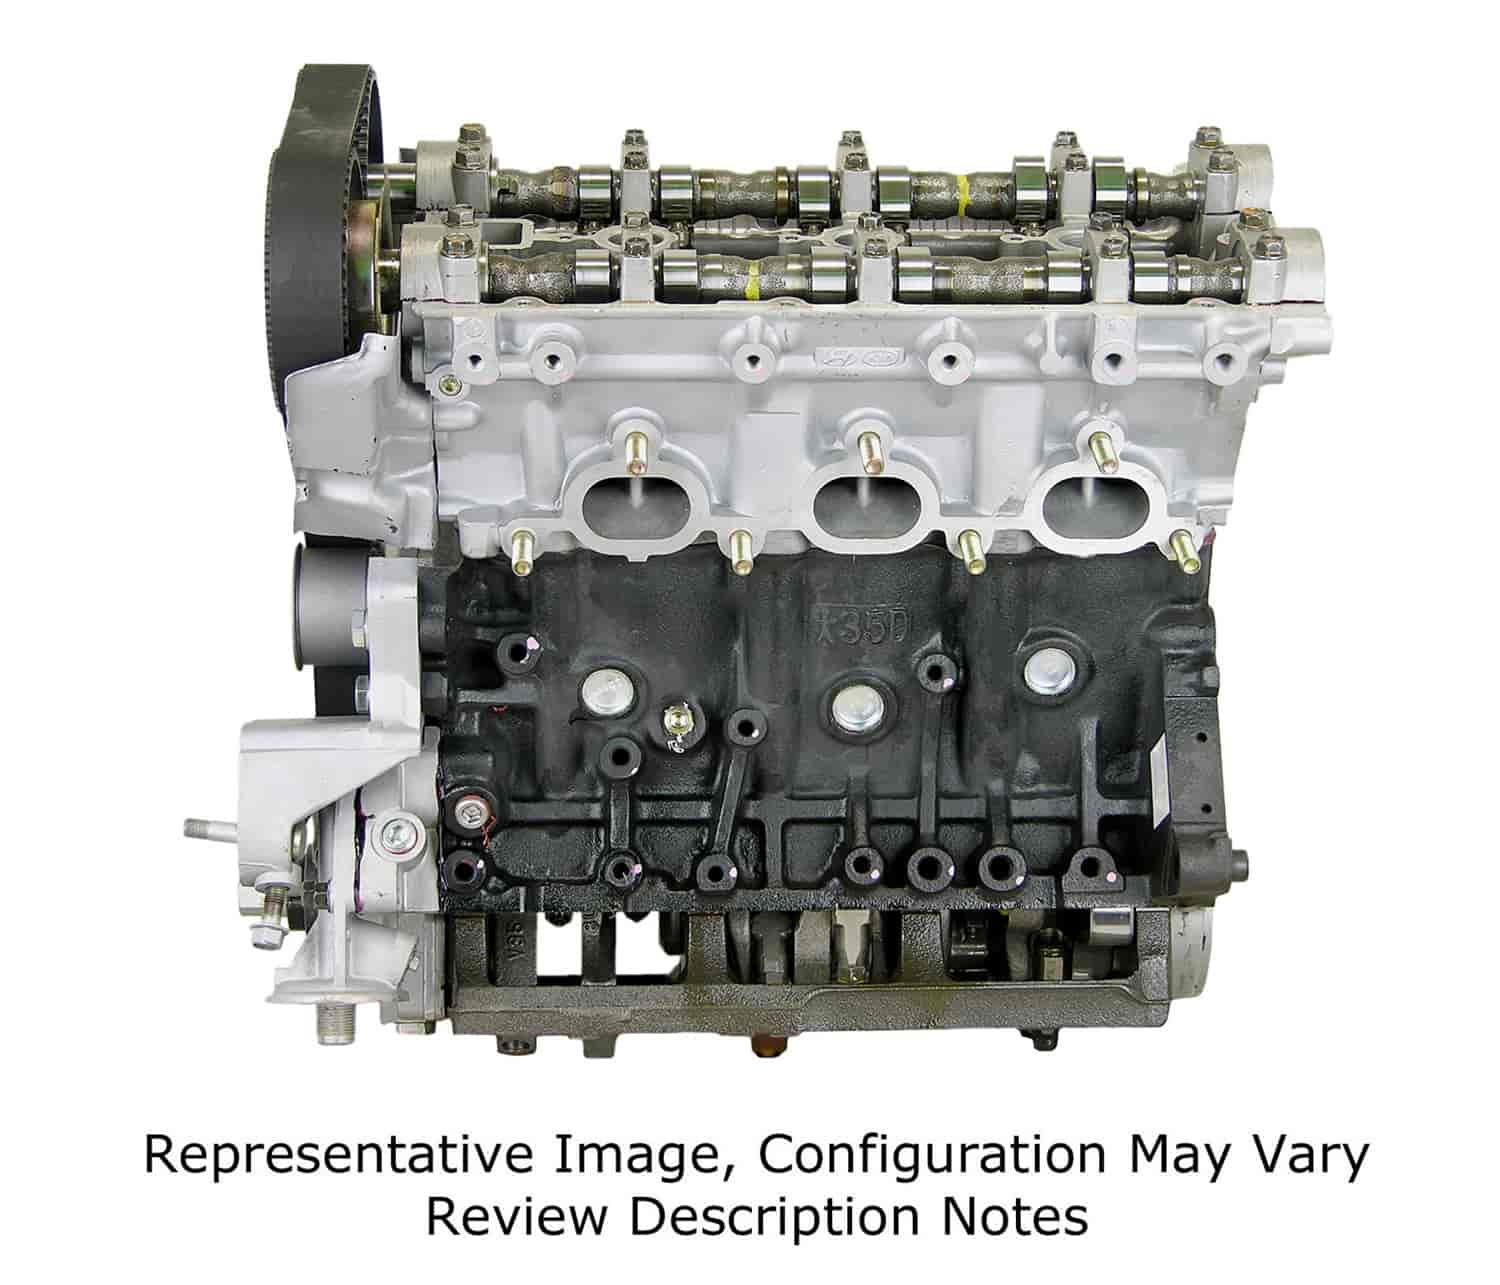 Remanufactured Crate Engine for 2001 Hyundai with 3.0L V6